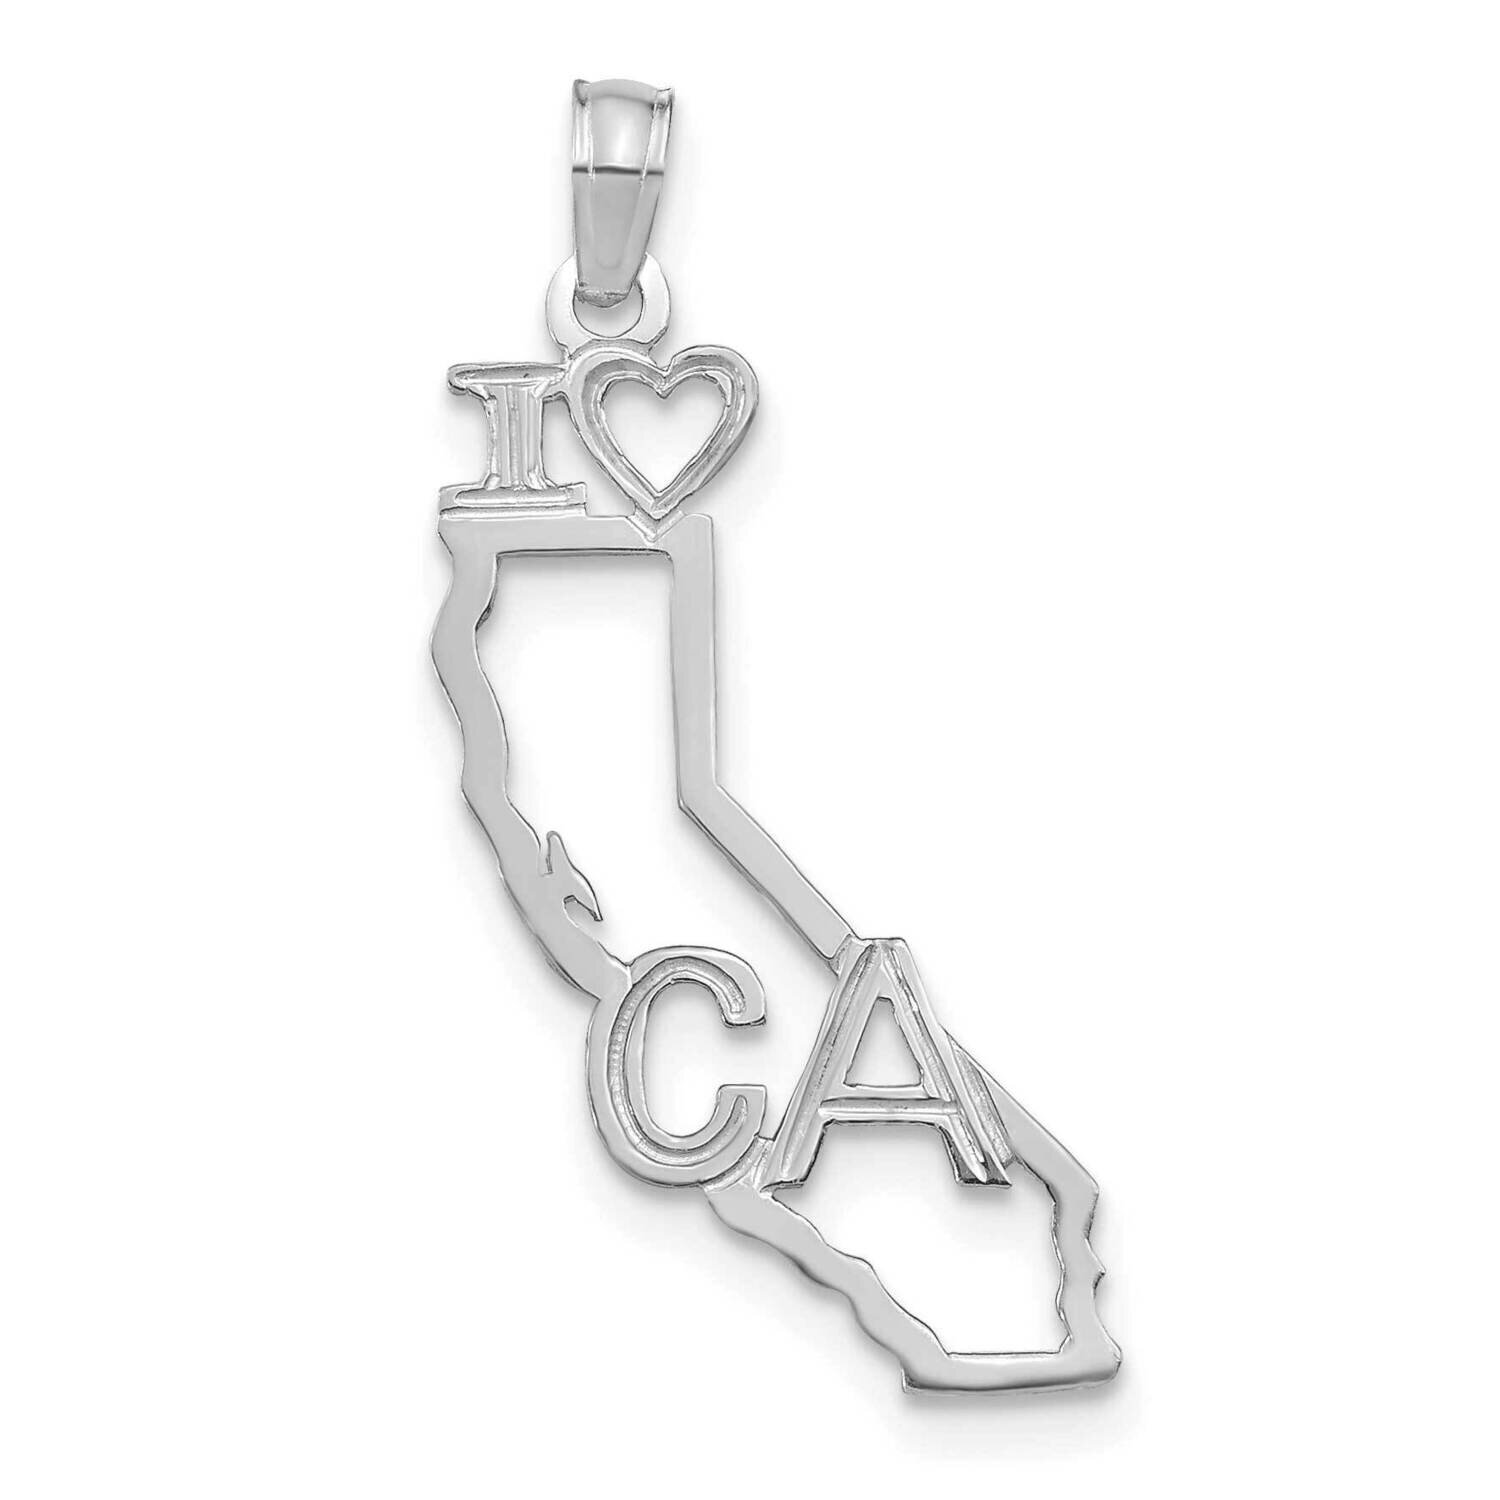 California State Pendant 14k White Gold Solid D1152W